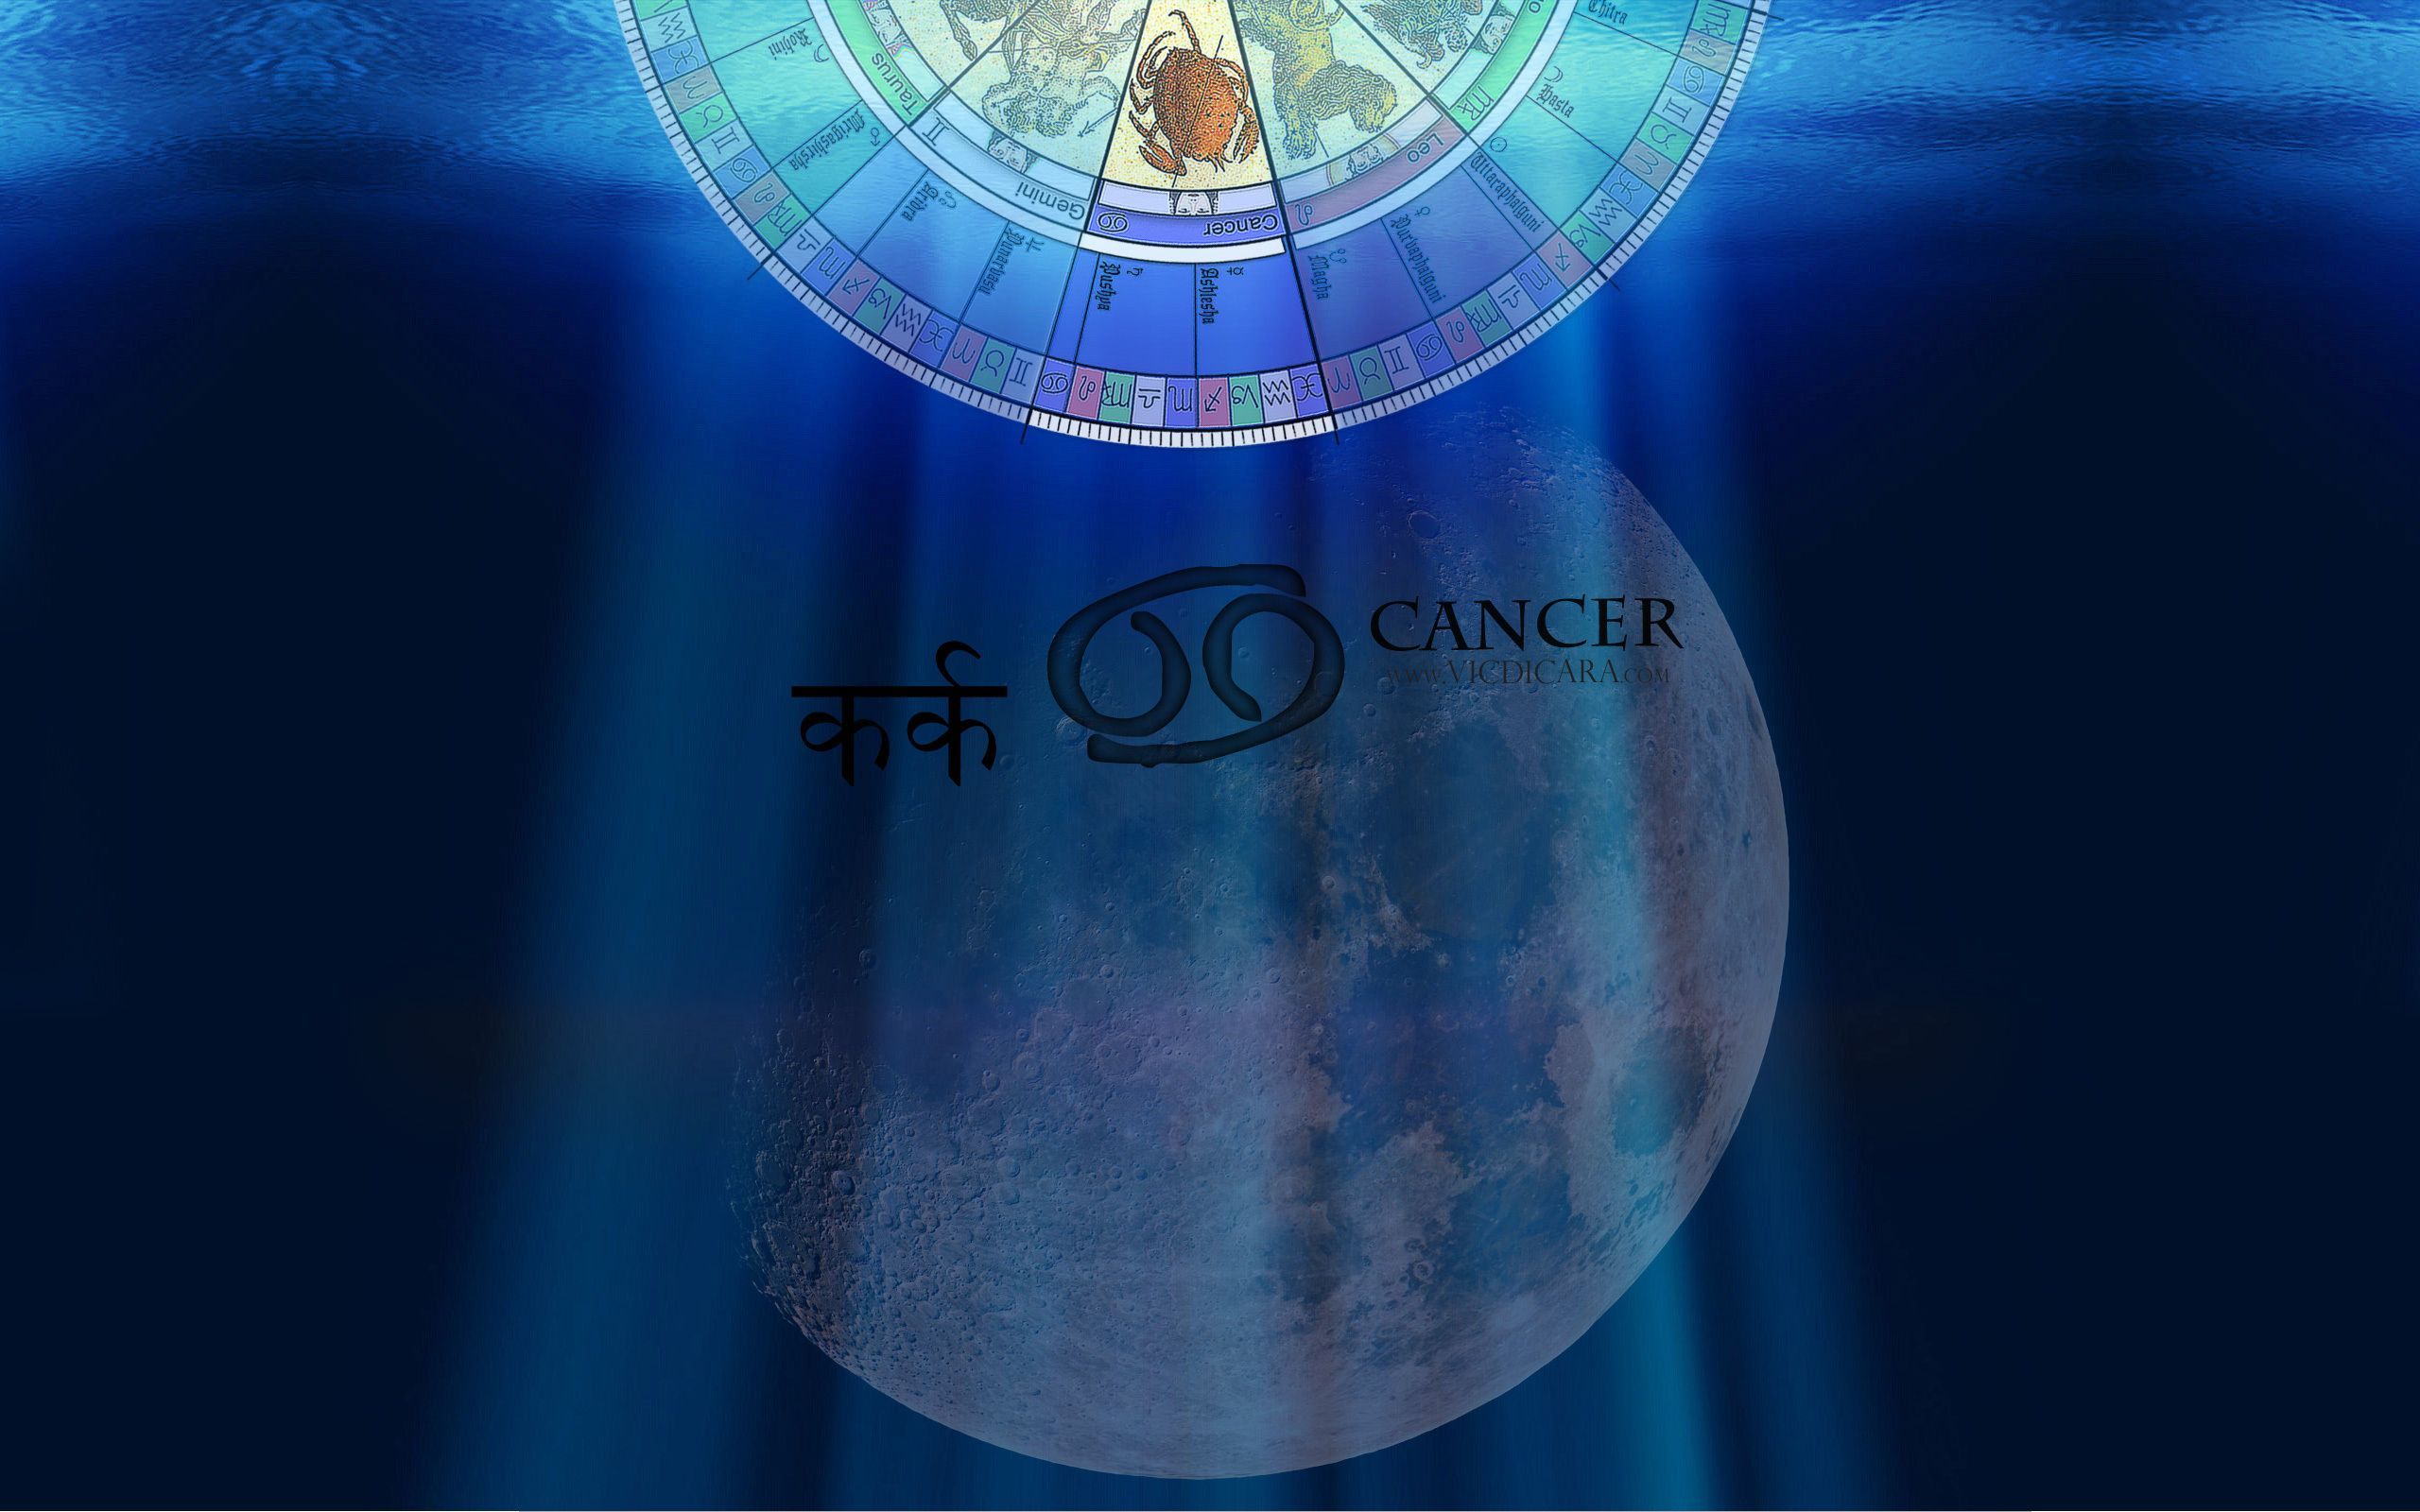 Zodiac sign cancer on the background of the moon wallpaper